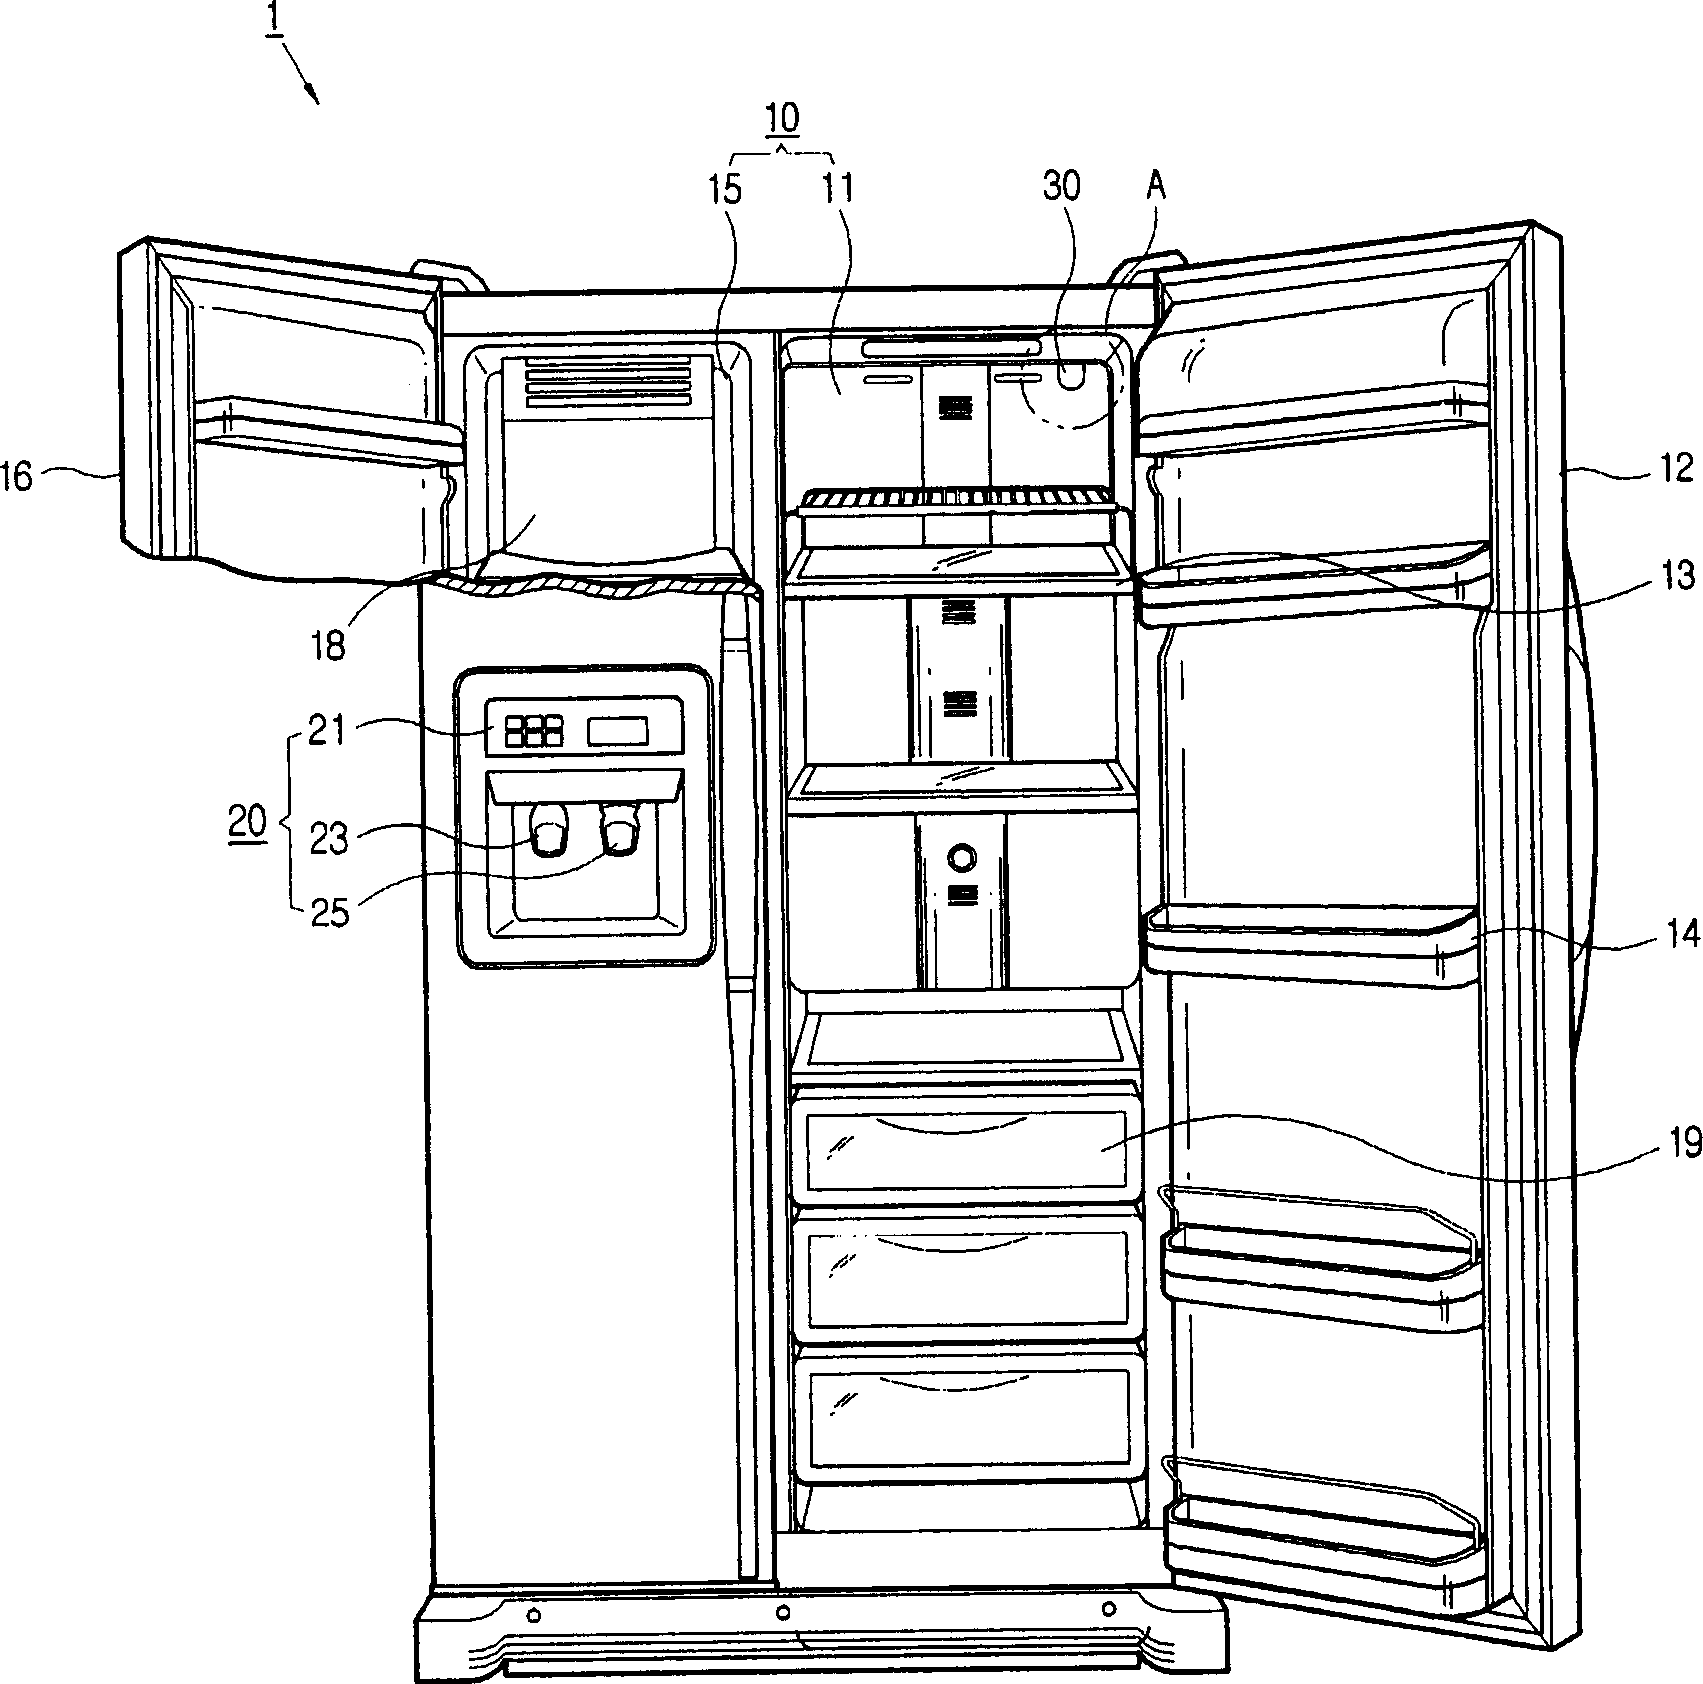 Water purification filter assembly for use in a refrigerator and refrigerator including the same